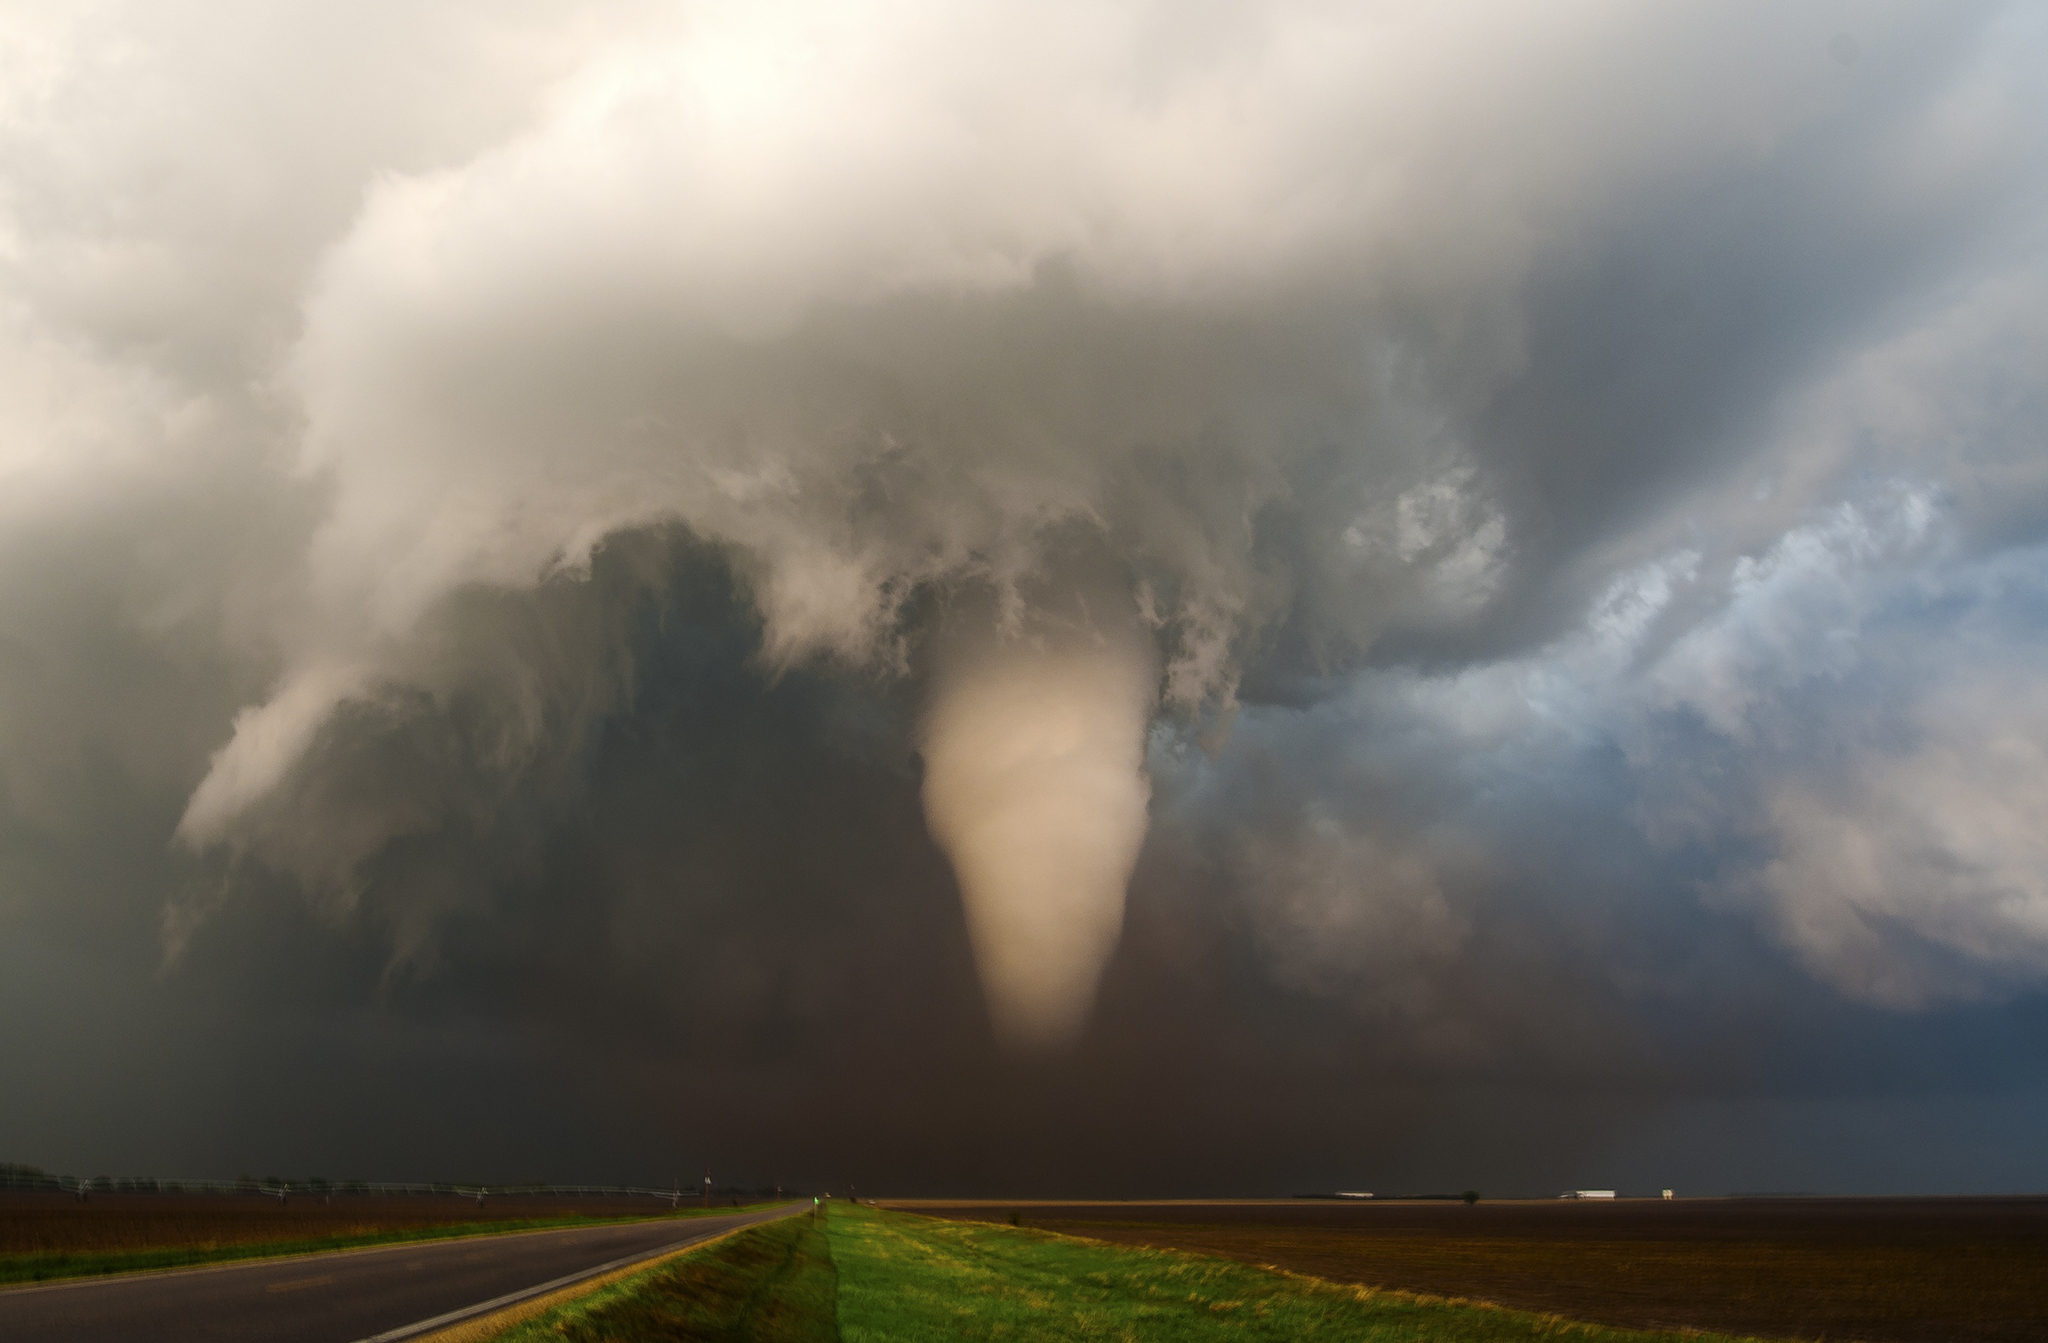 Tornadoes: The Science Behind the Destruction